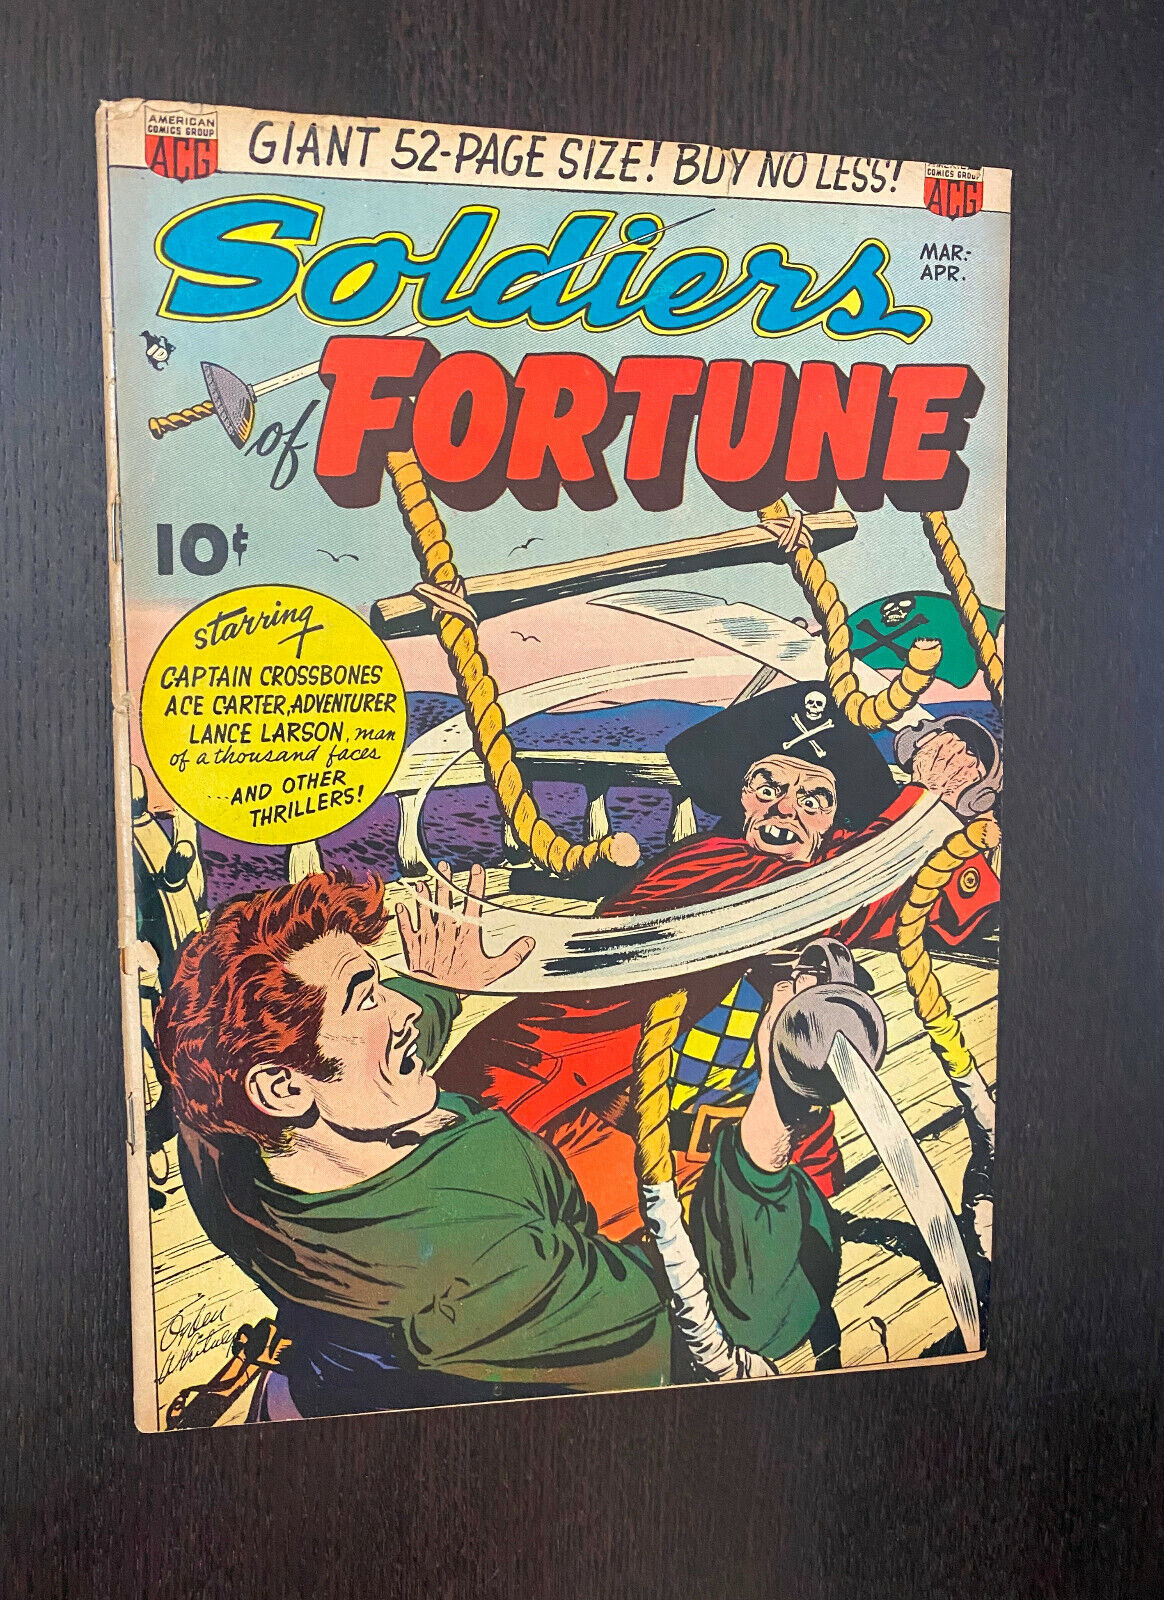 SOLDIERS OF FORTUNE #1 (ACG Comics 1951) -- QUALIFIED (1 pg missing) VG/FN